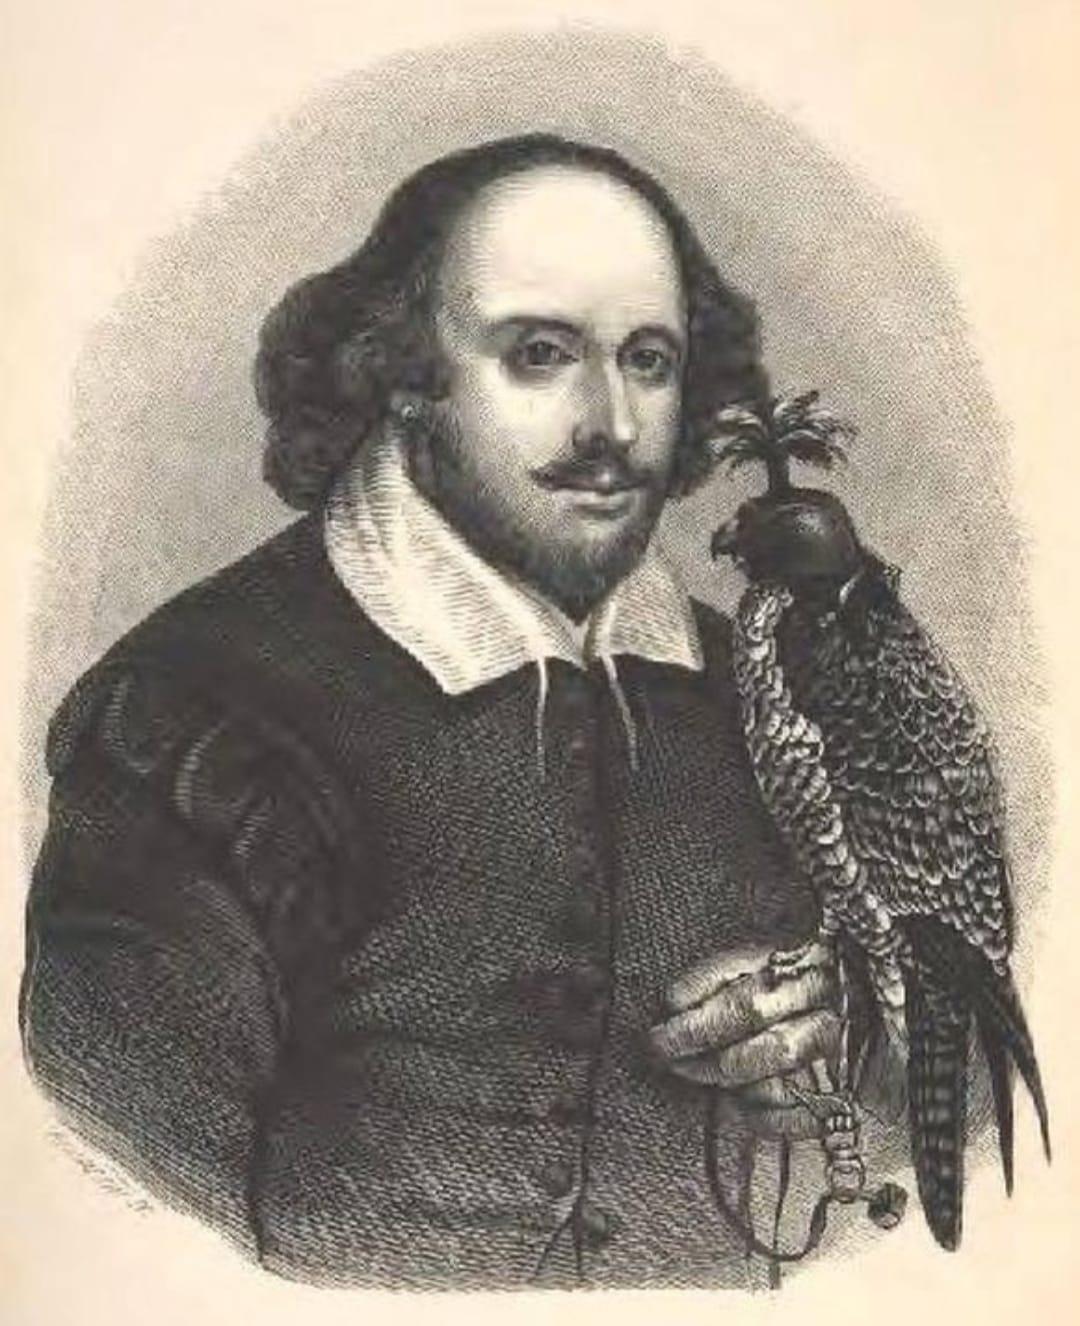 WILLIAM SHAKESPEARE (1564-1616) From the Chandos Portrait